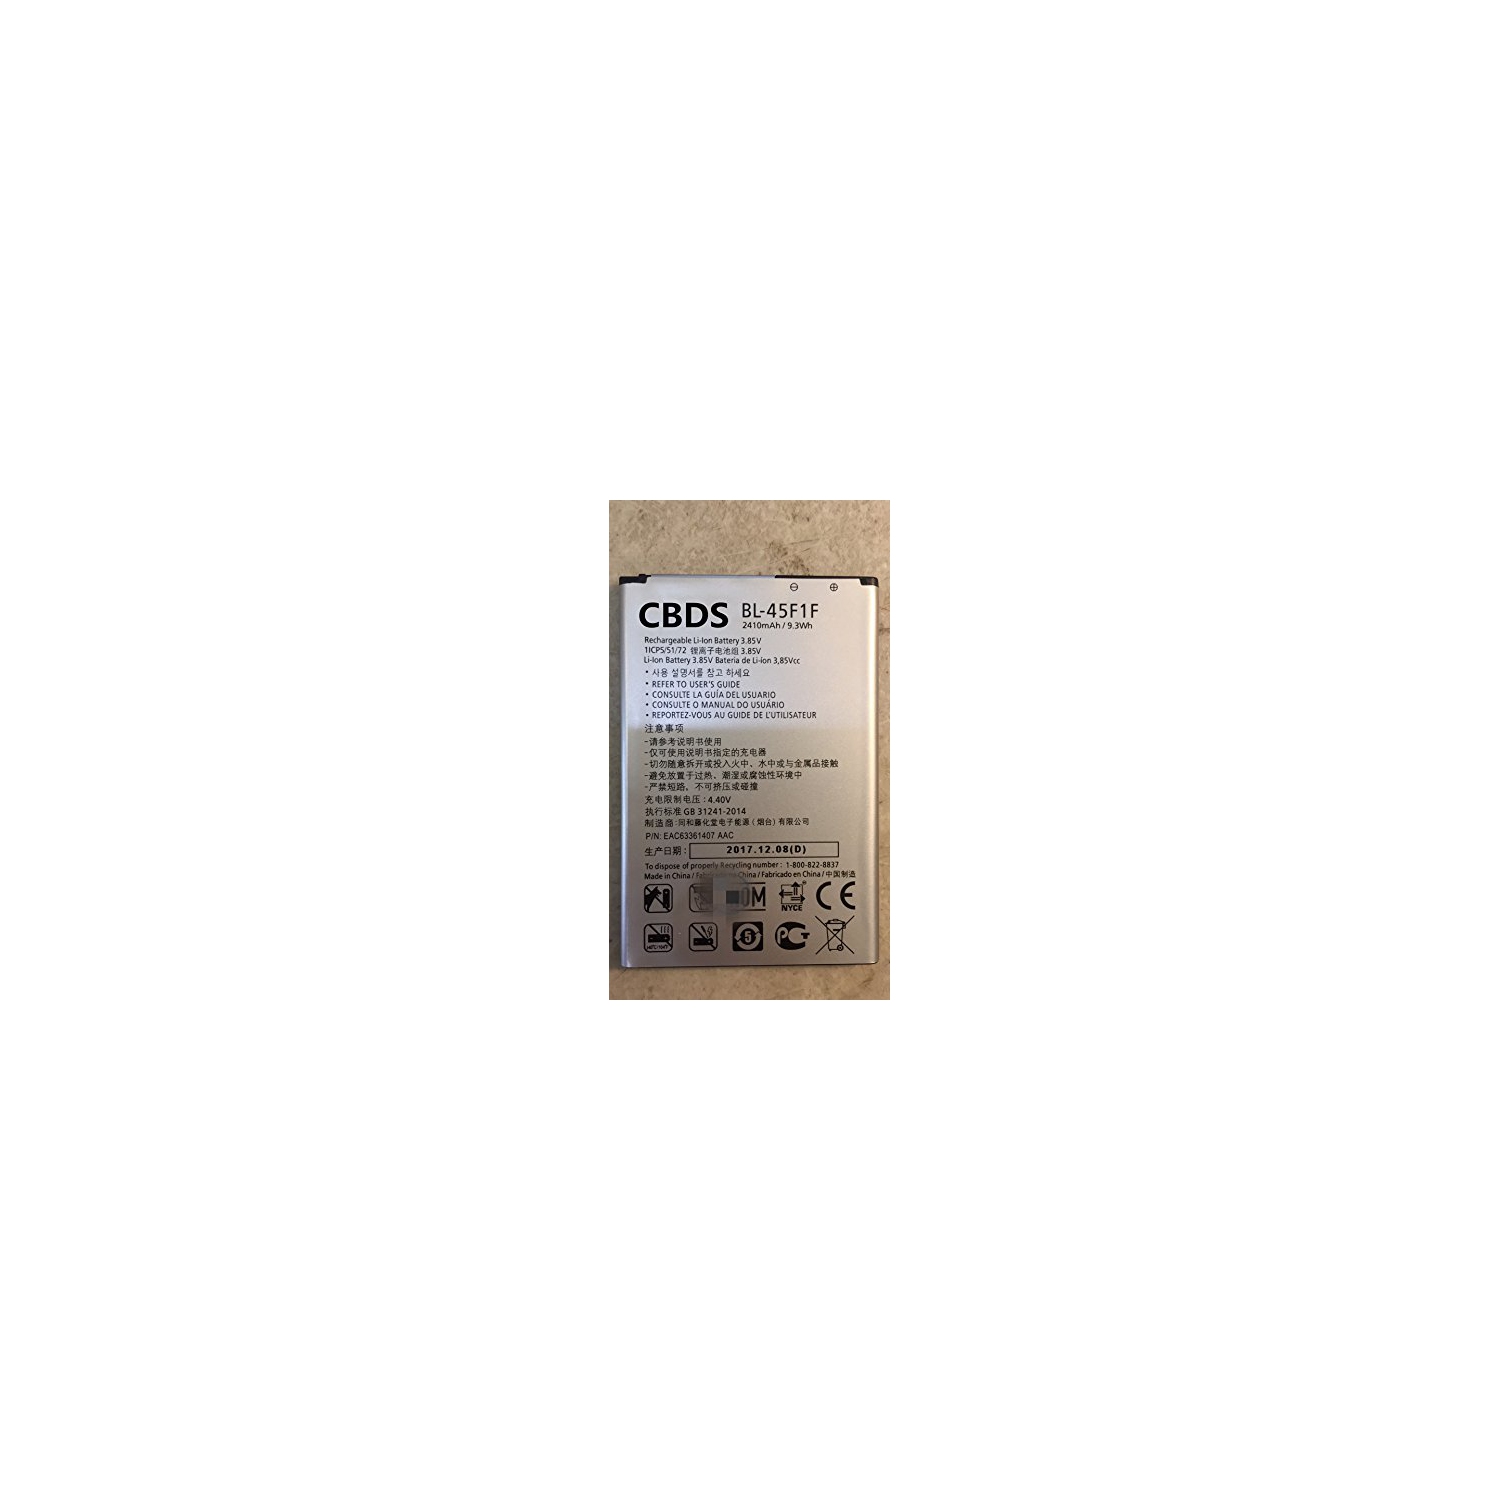 (CBDS) 2410mAh, 9.3 Wh Replacement Battery - Compatible with LG Phoenix 3 Fortune Risio 2 K4 K8 2017 Aristo M210 KM210 M